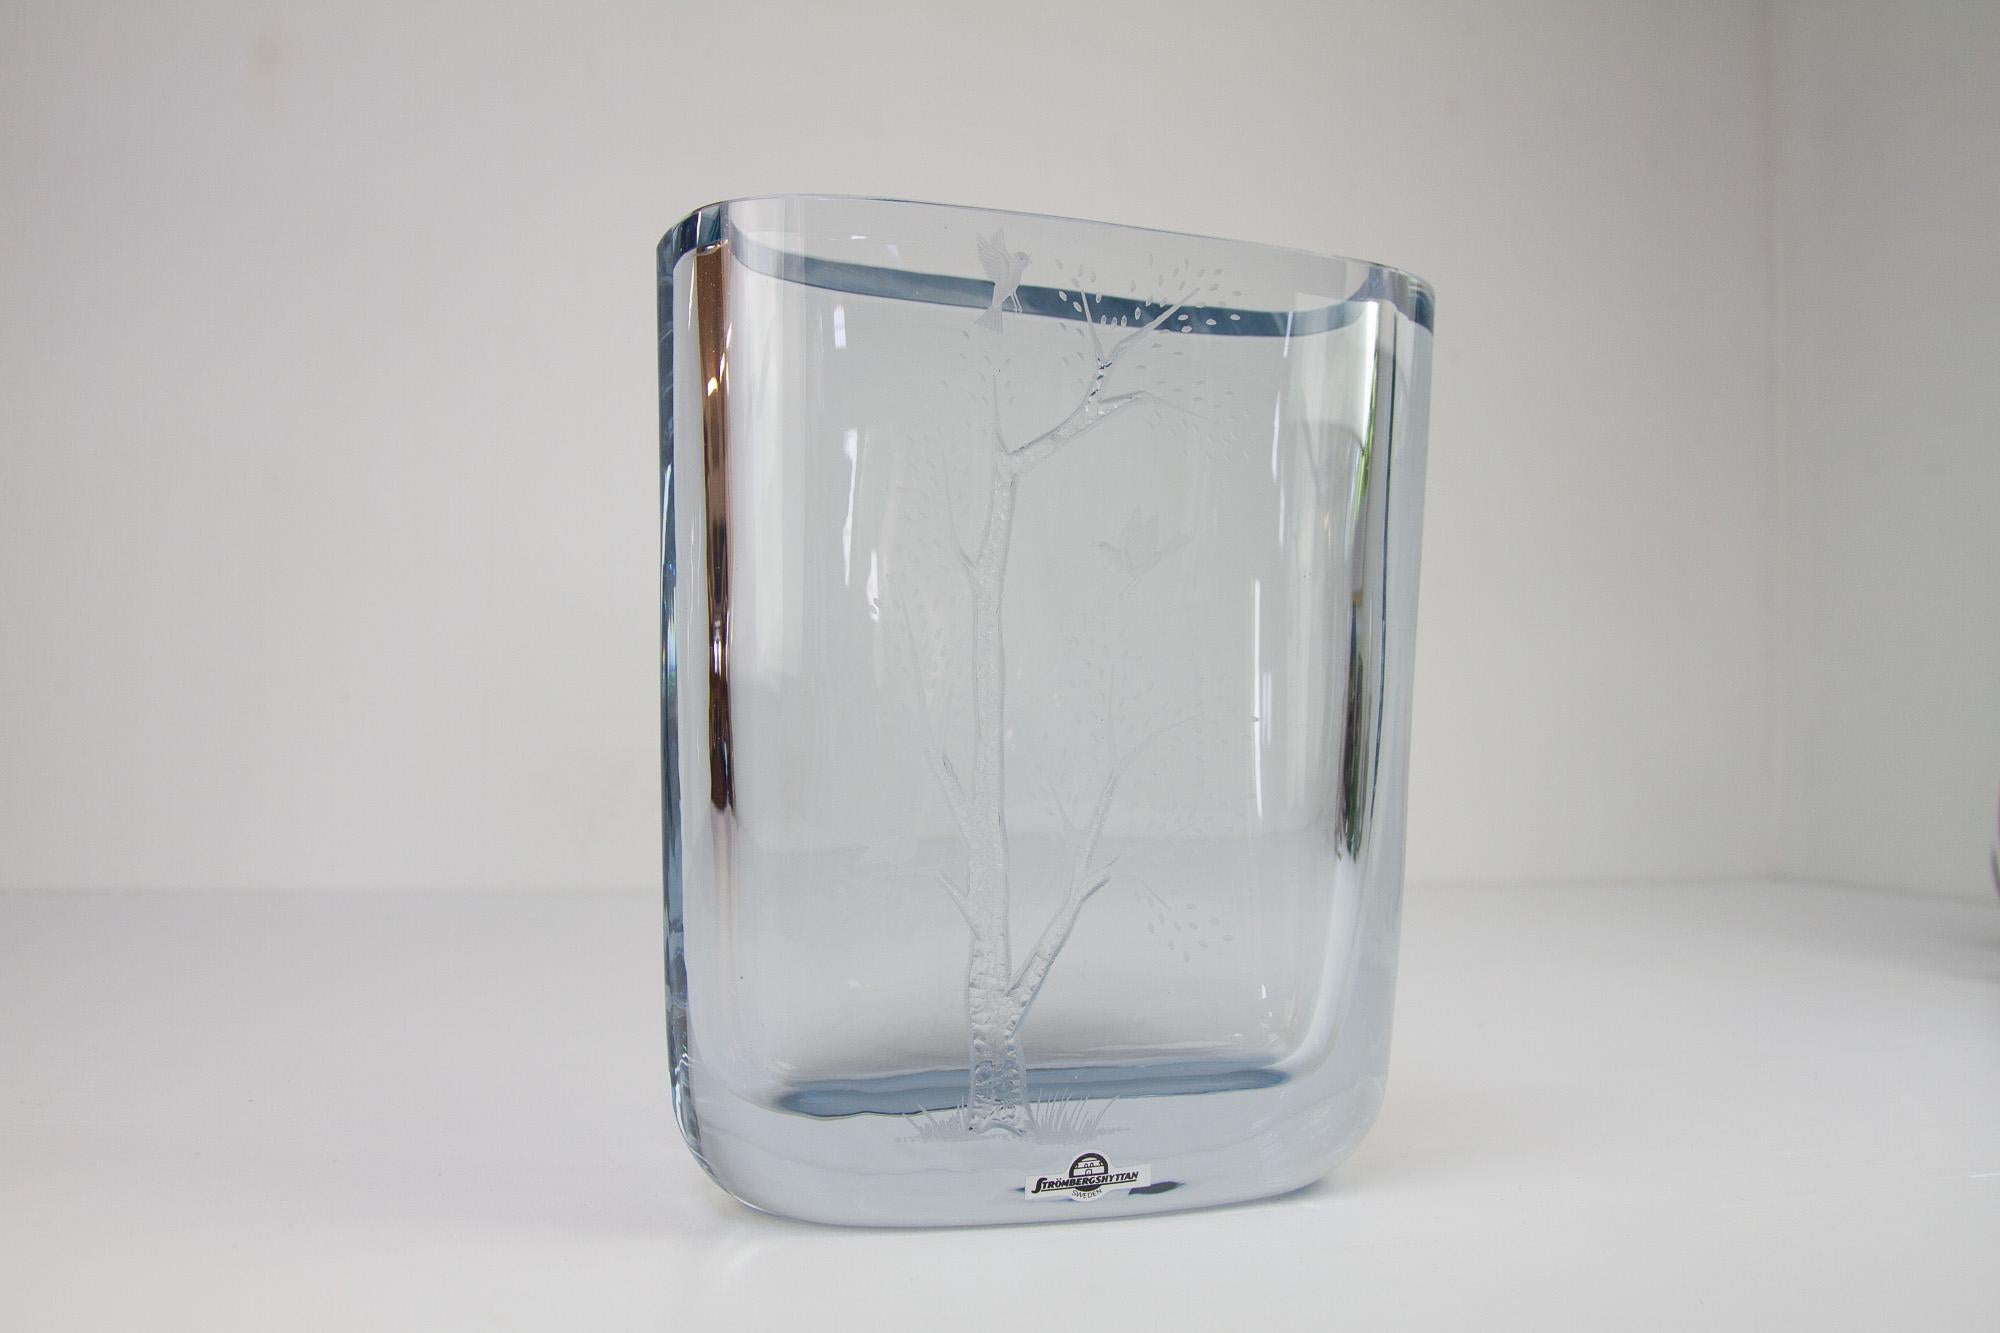 Vintage Swedish Blue Crystal Vase by Asta Strömberg for Strömbergshyttan, 1950. 
Large and heavy glass art in thick silver-blue tinted glass with etched motif of a tree with birds.
Excellent vintage condition with intact sticker. Signed underneath